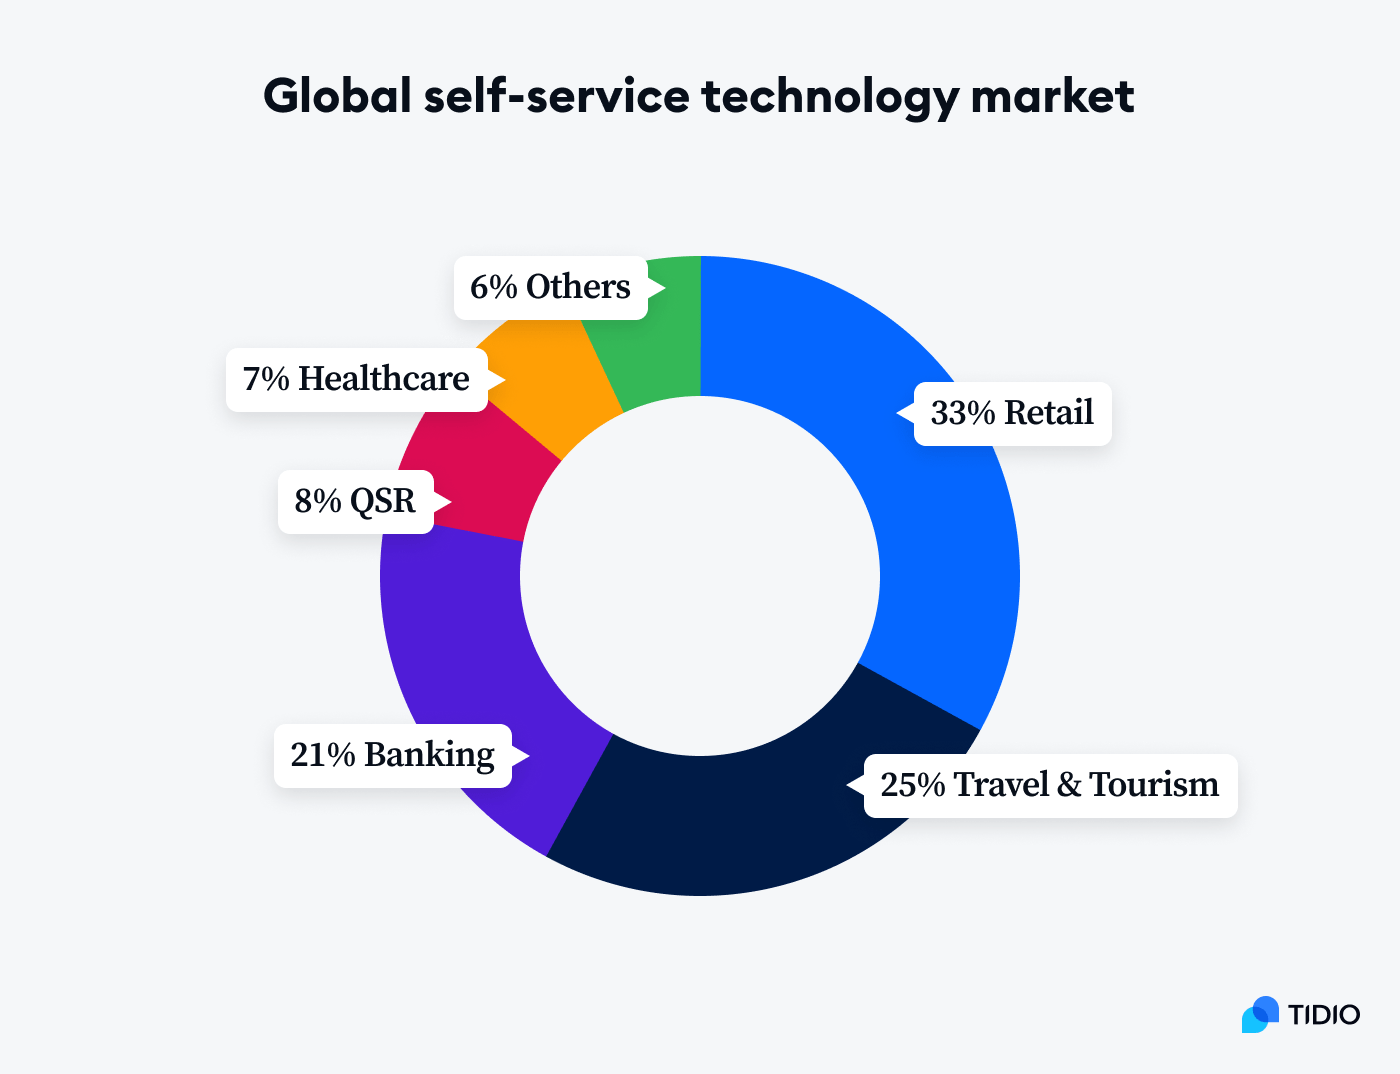 The global self-service technology market is expected to grow at a compound annual growth rate of almost 14% from 2023 to 2030 to reach $92 billion by 2030